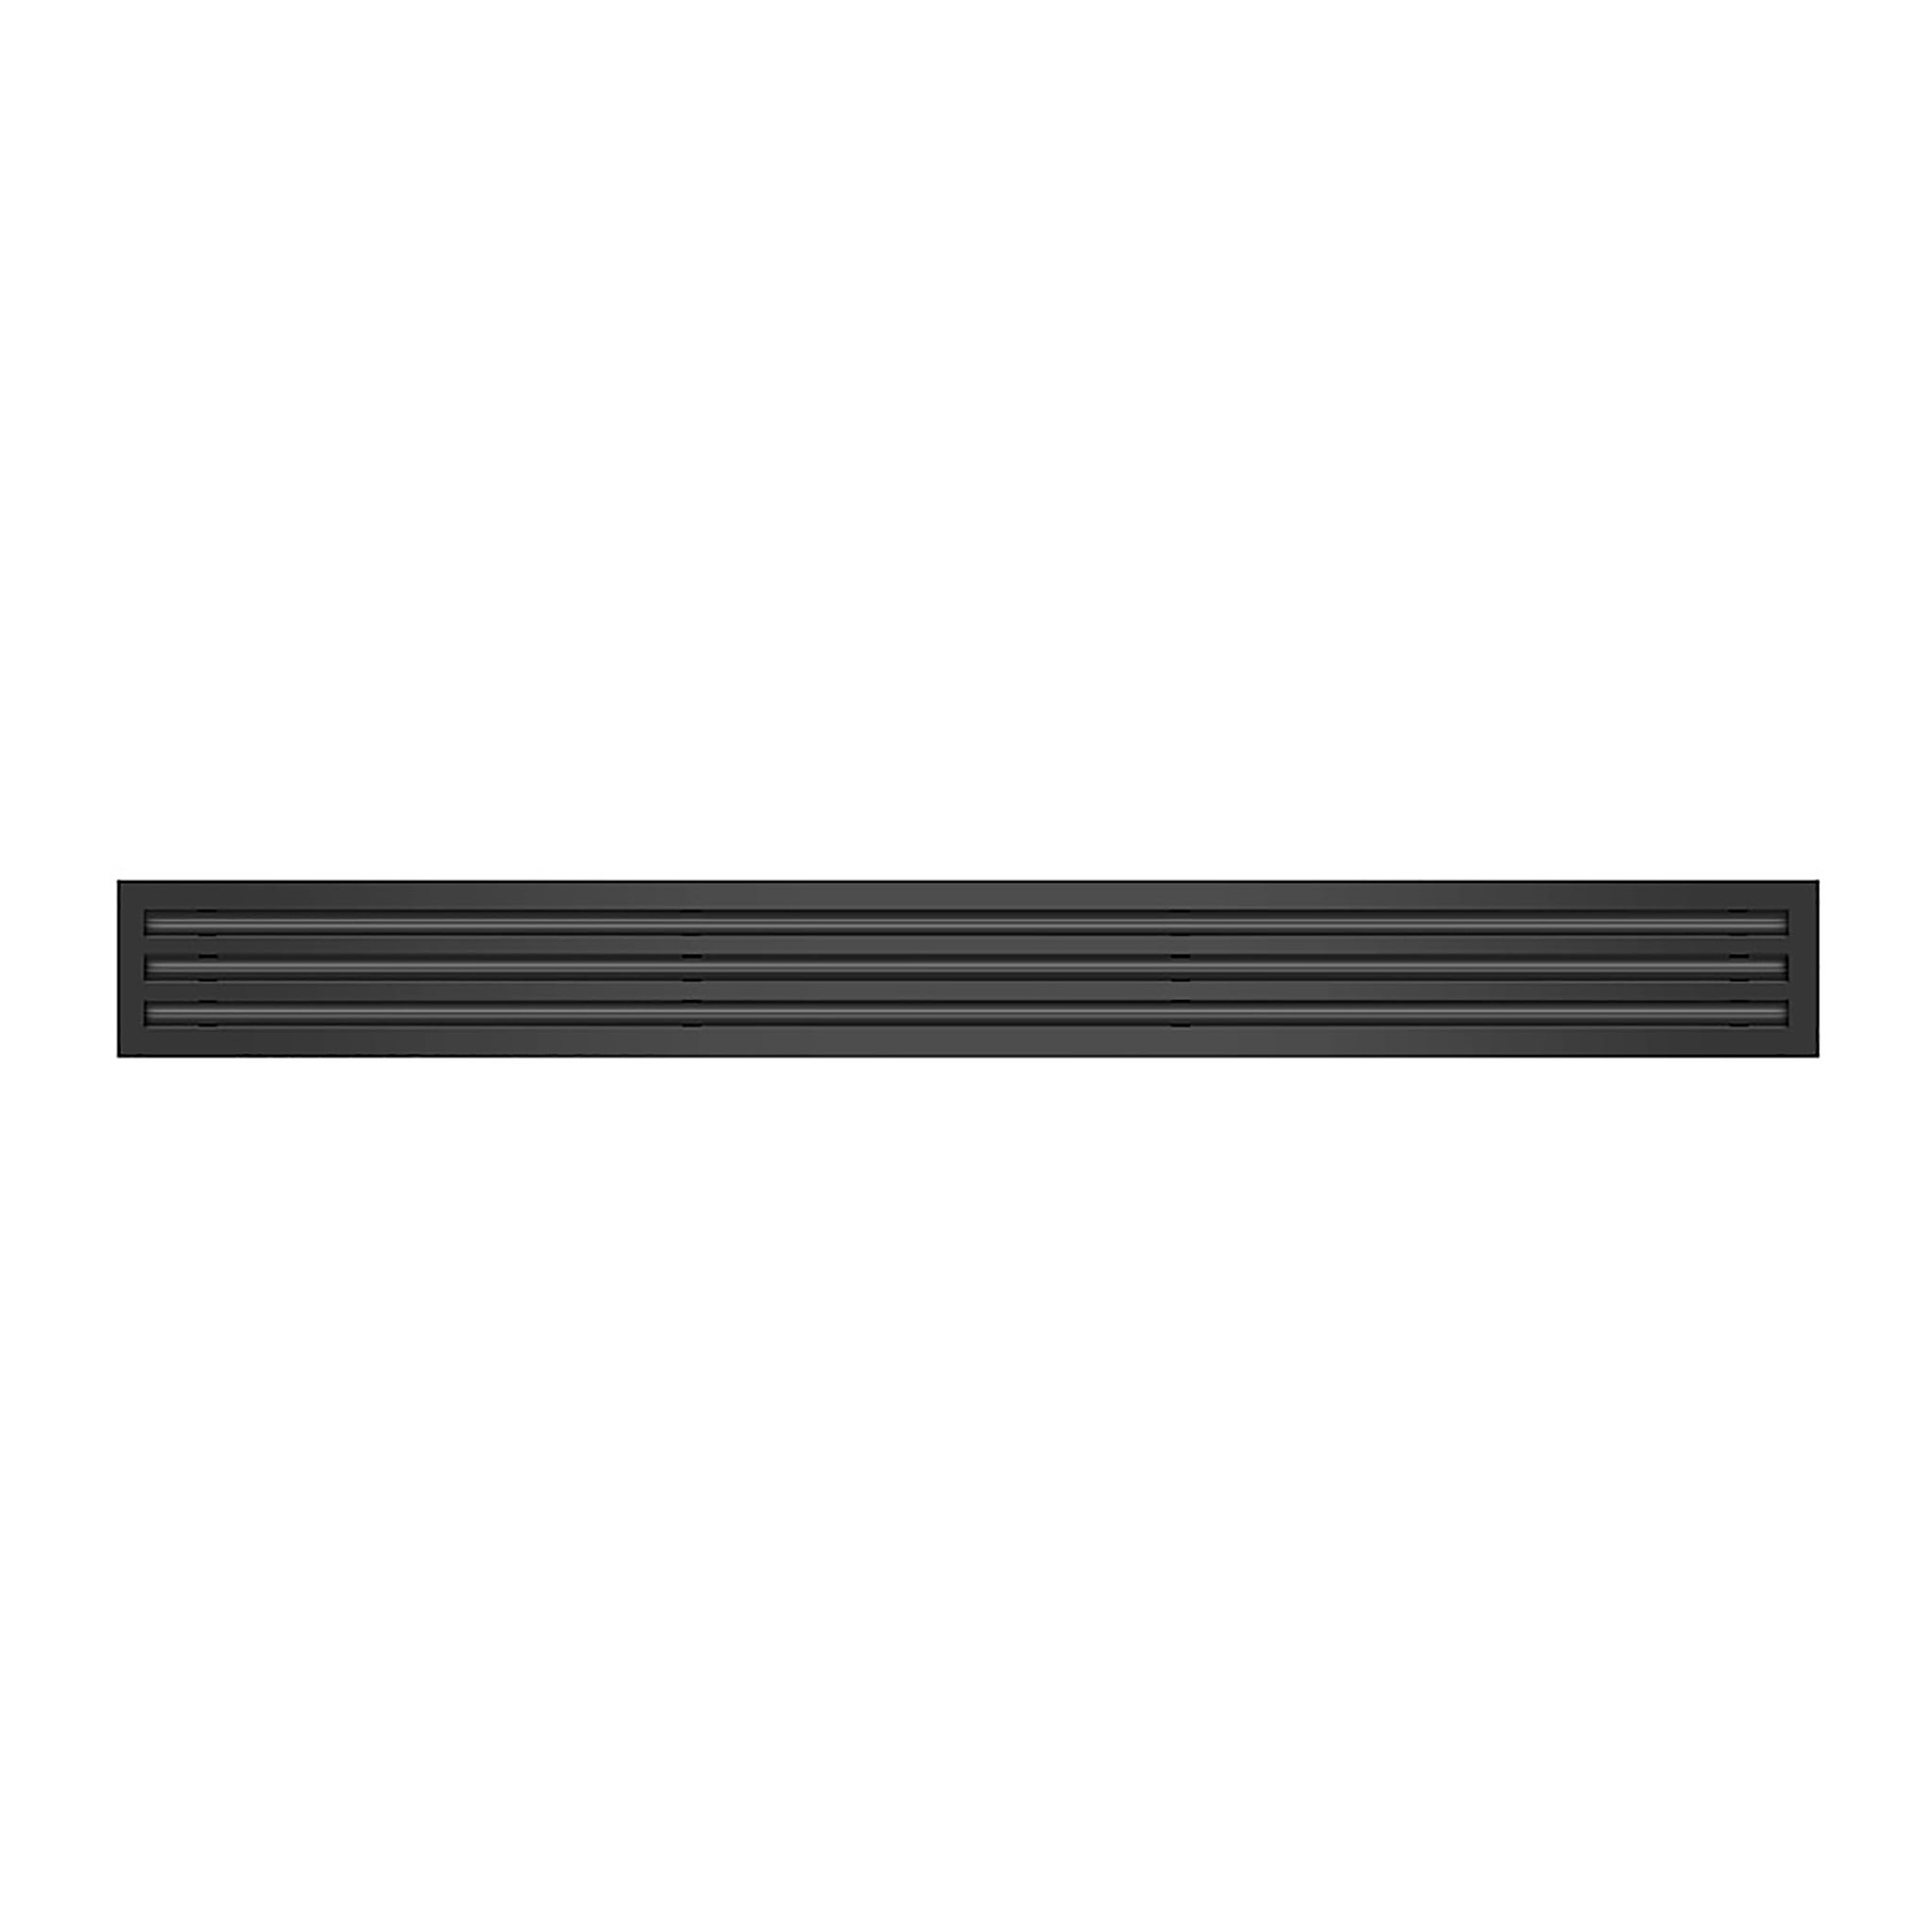 Front of 48 Inch 3 Slot Linear Air Vent Cover Black - 48 Inch 3 Slot Linear Diffuser Black - Texas Buildmart